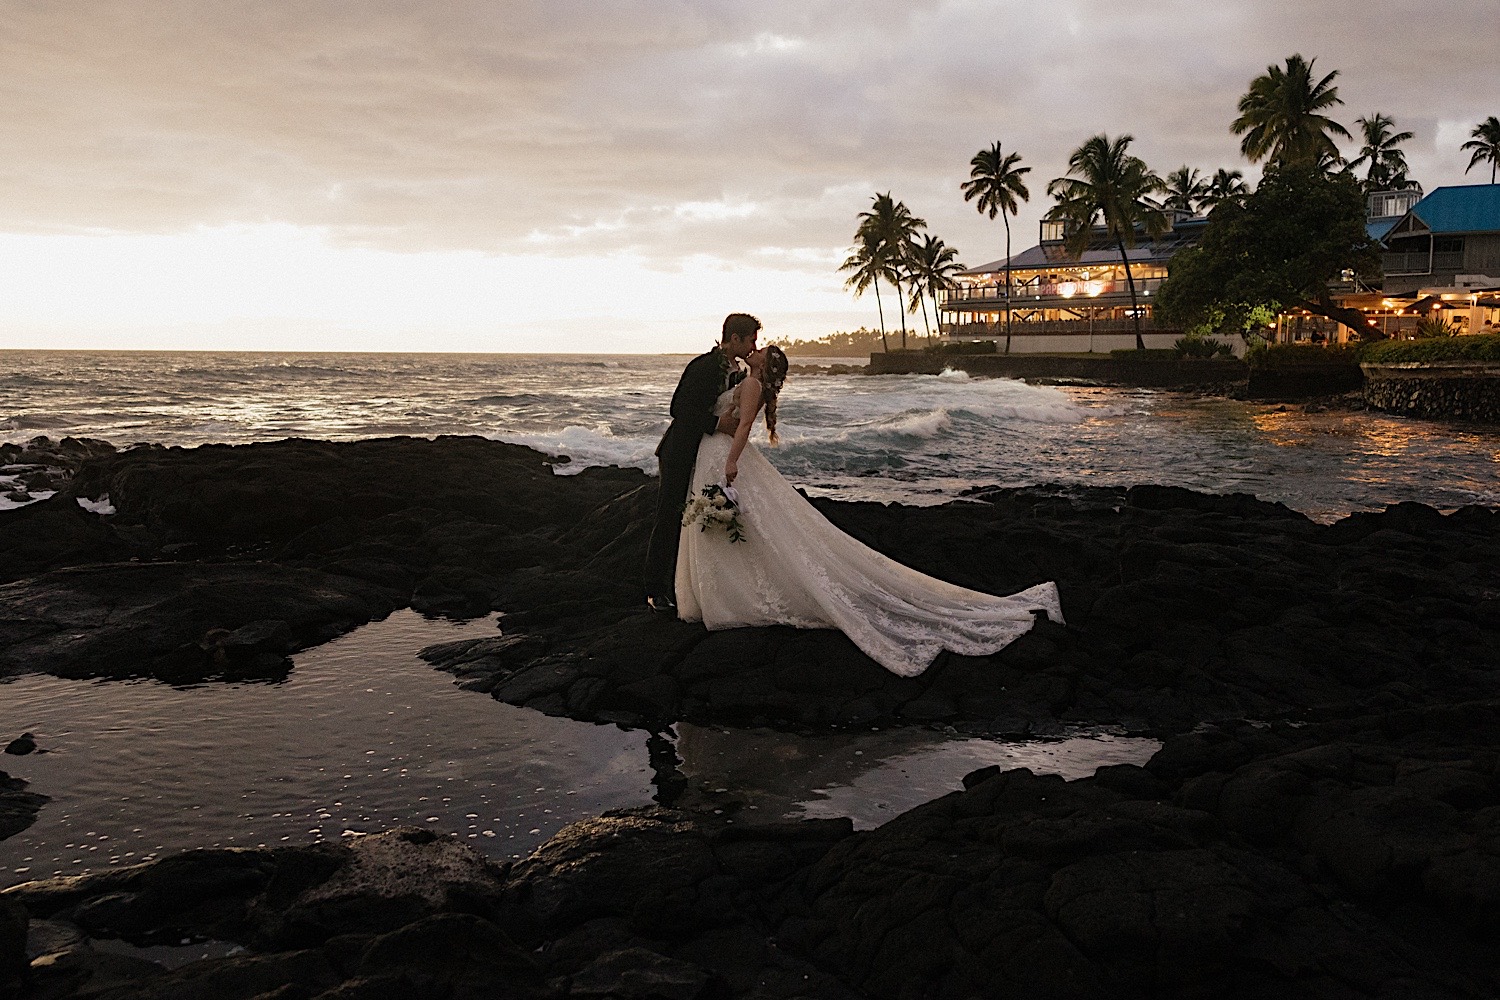 A bride and groom kiss one another while on a rocky shore in Hawaii with their wedding venue in the background behind them